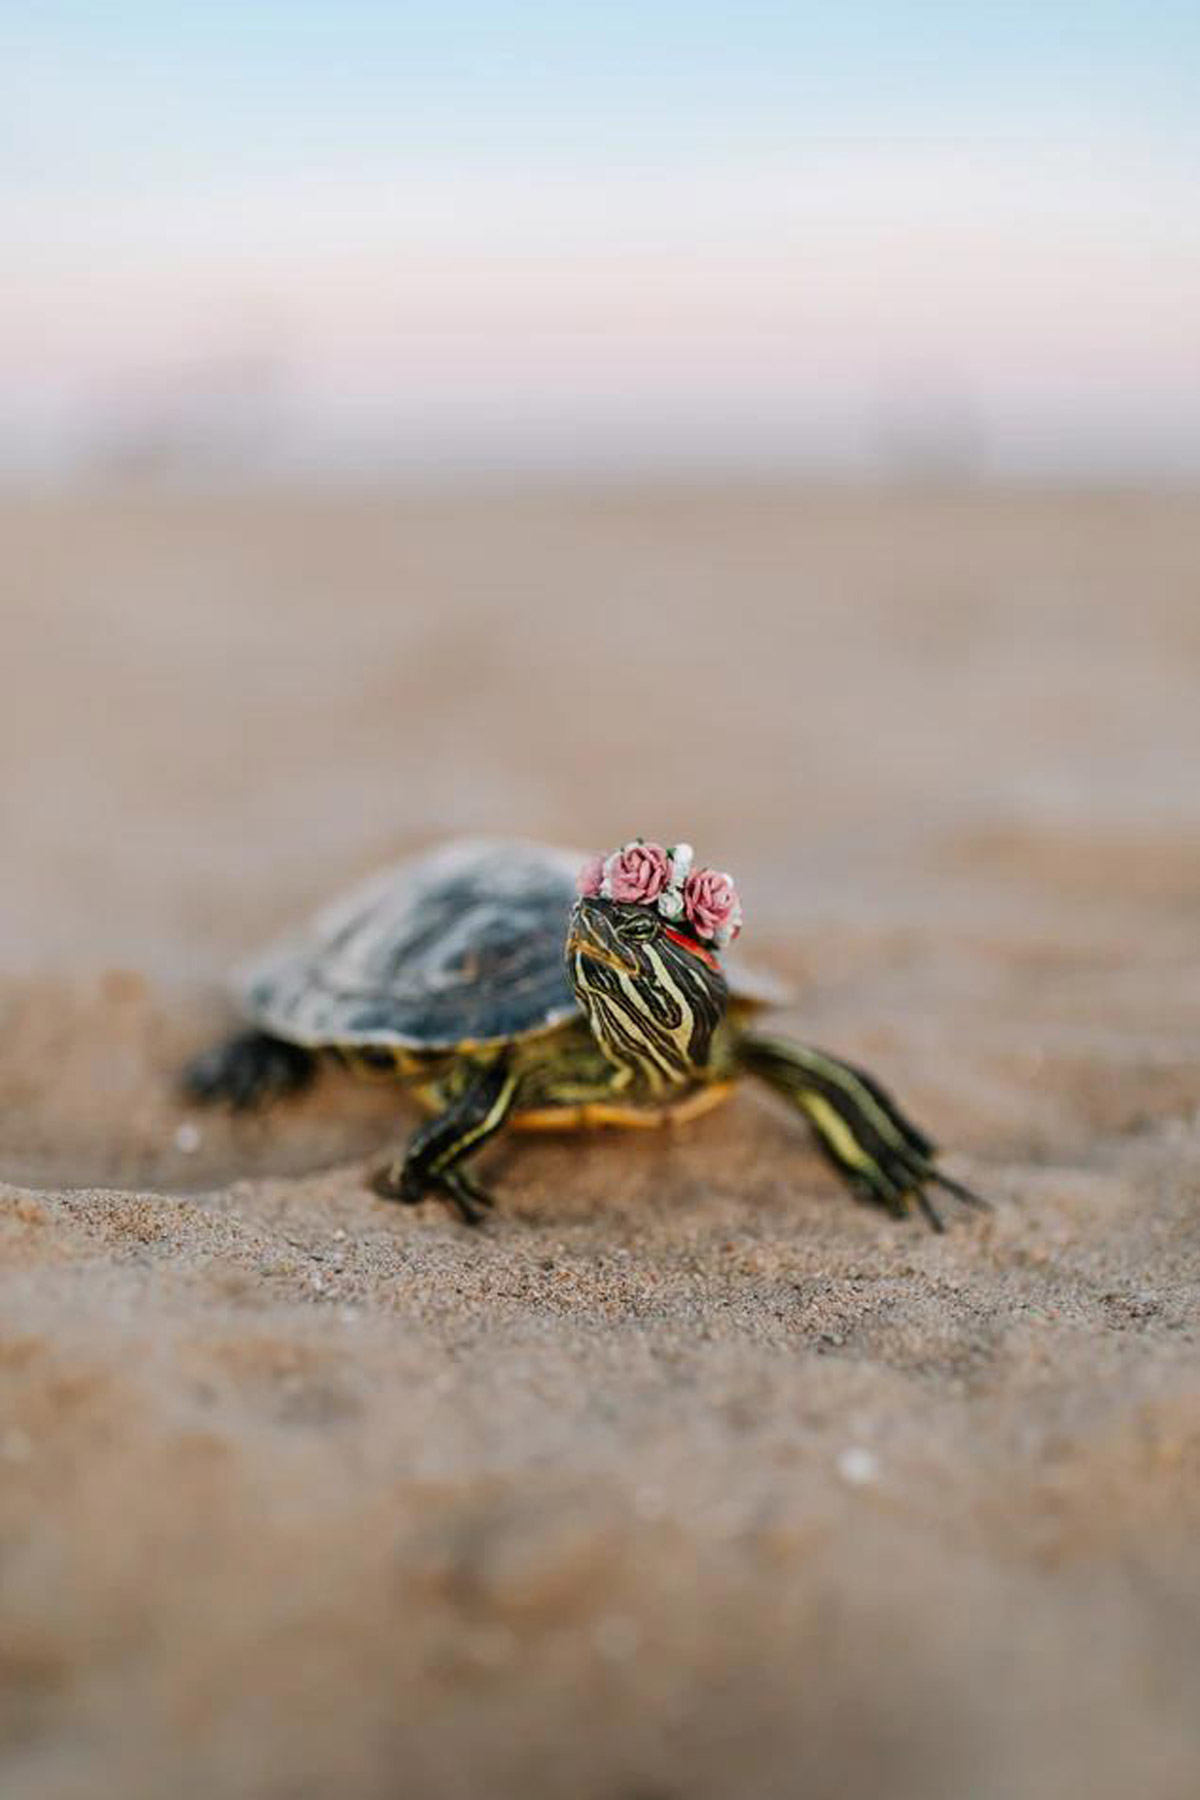 Planning to Get A Turtle? Here’s What You Should Know!